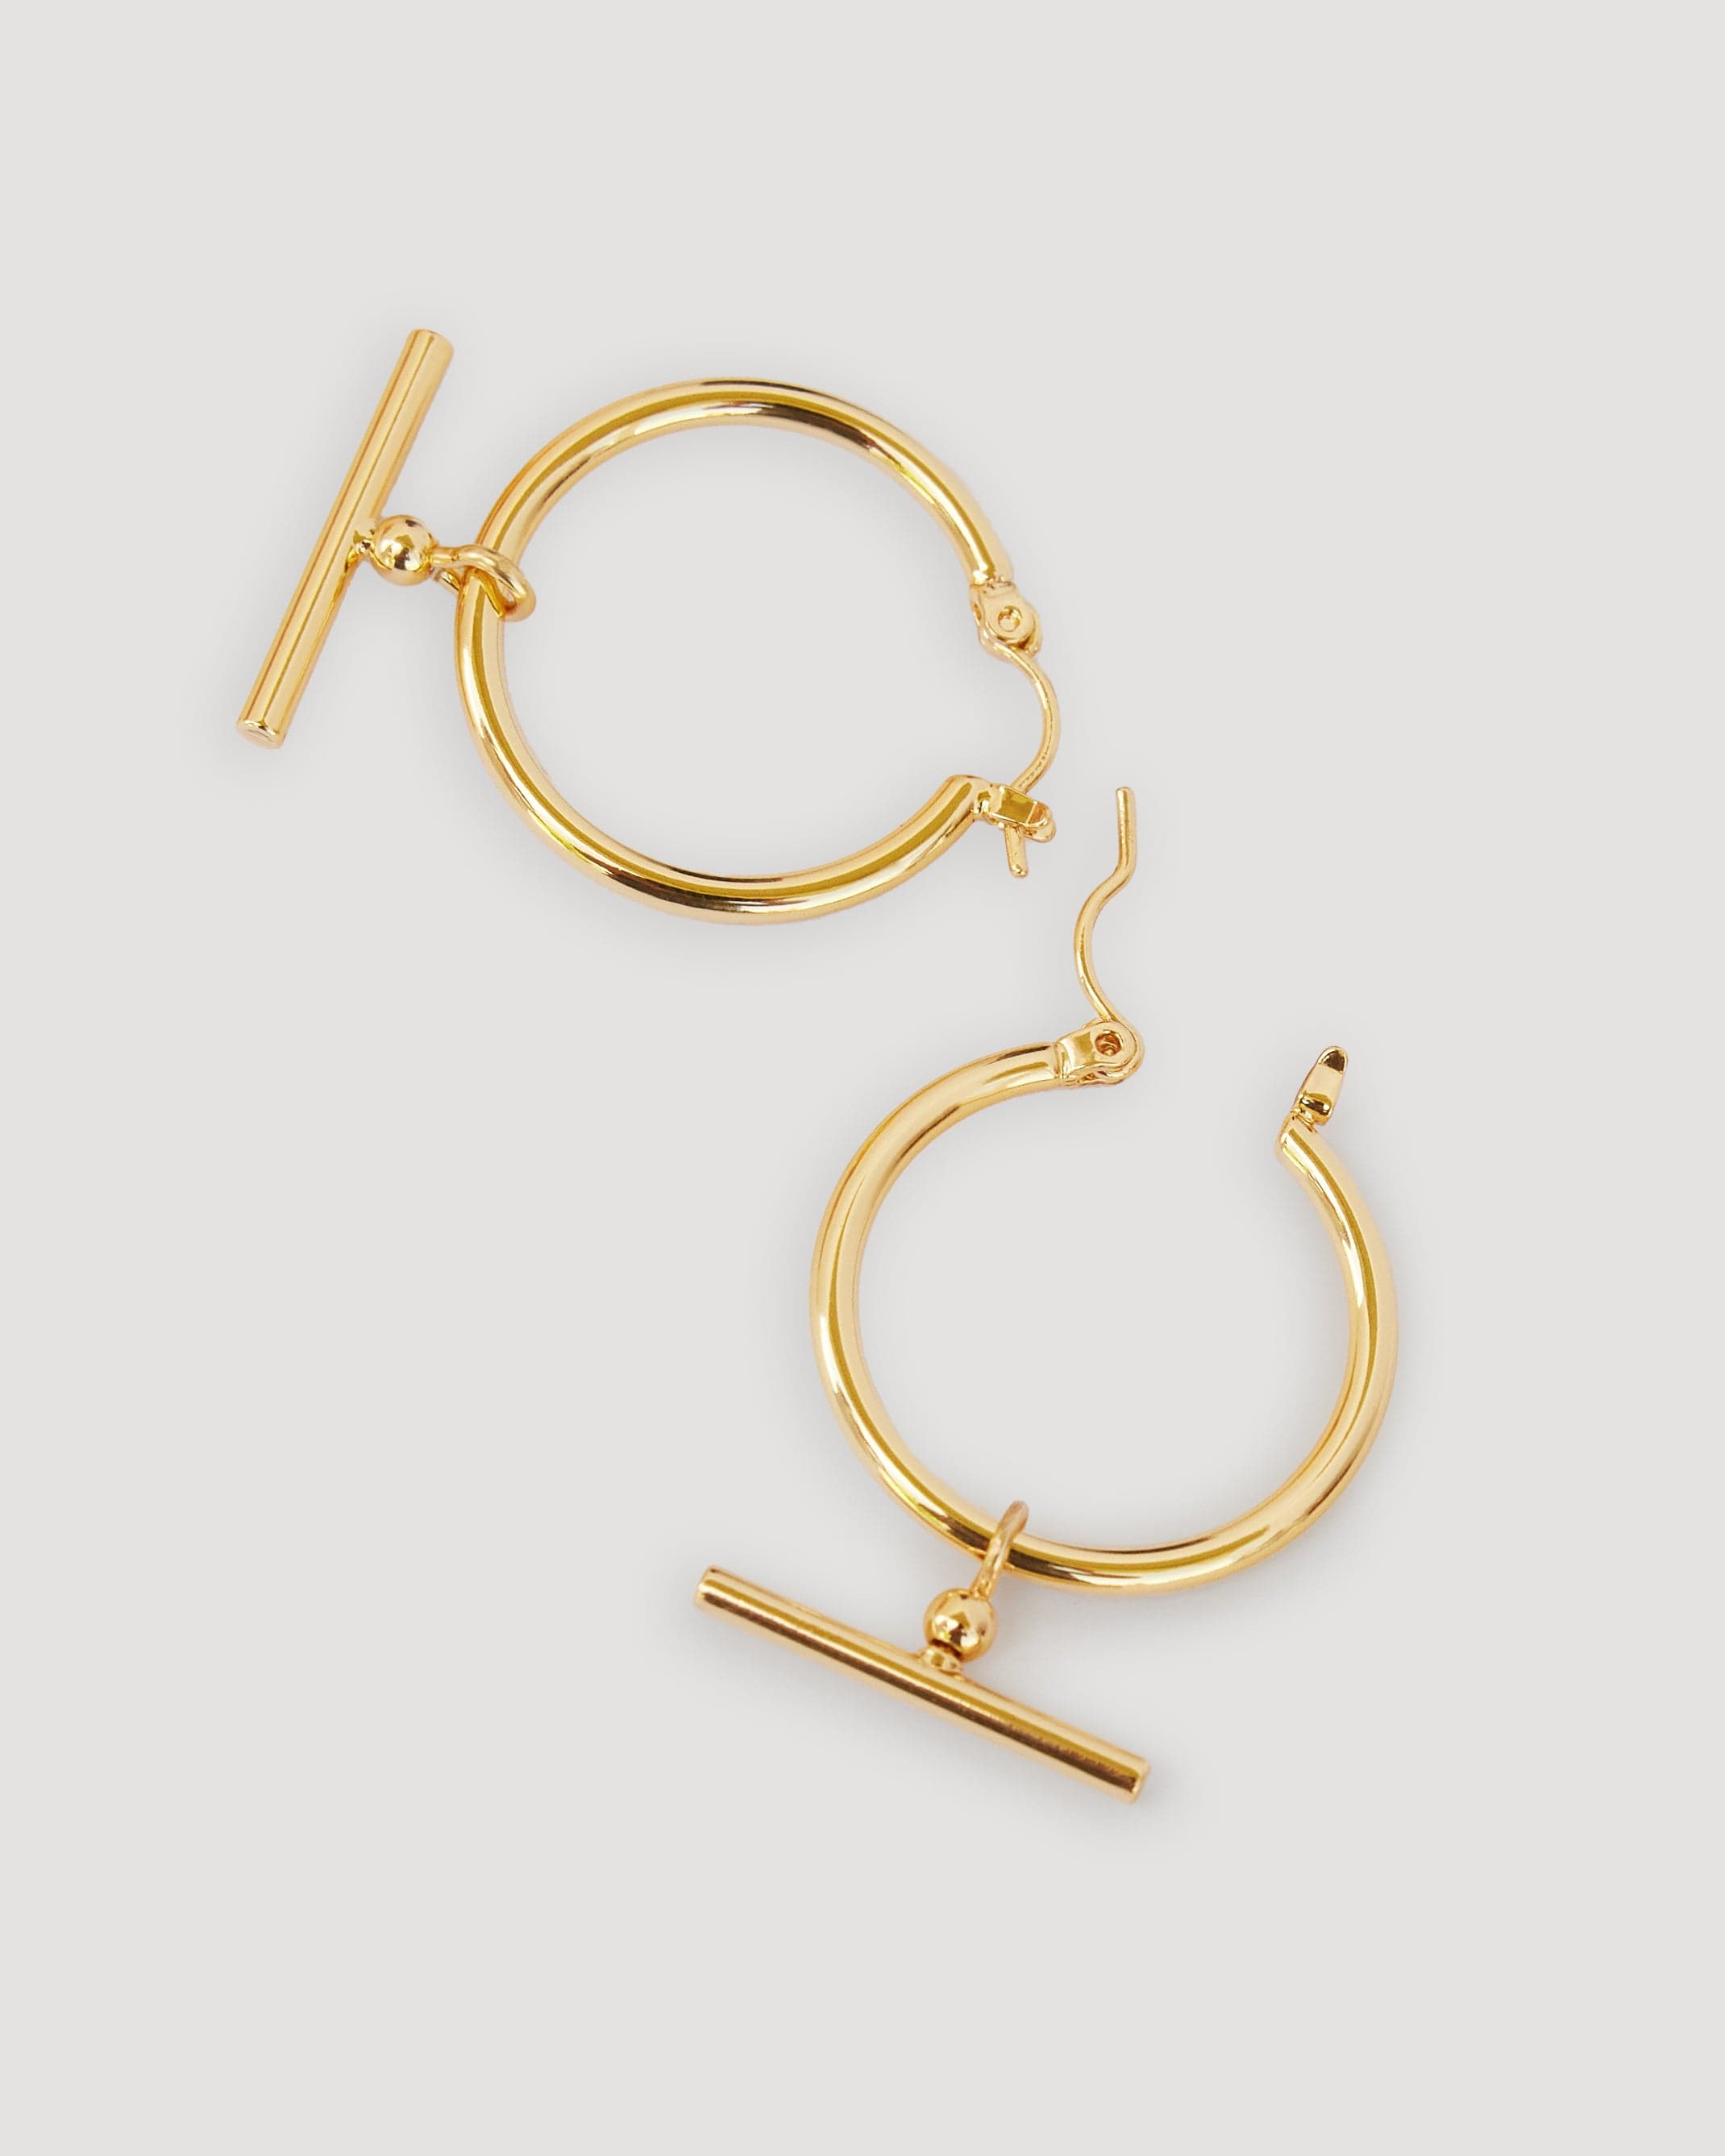 Gold huggie hoops with t-bar in middle